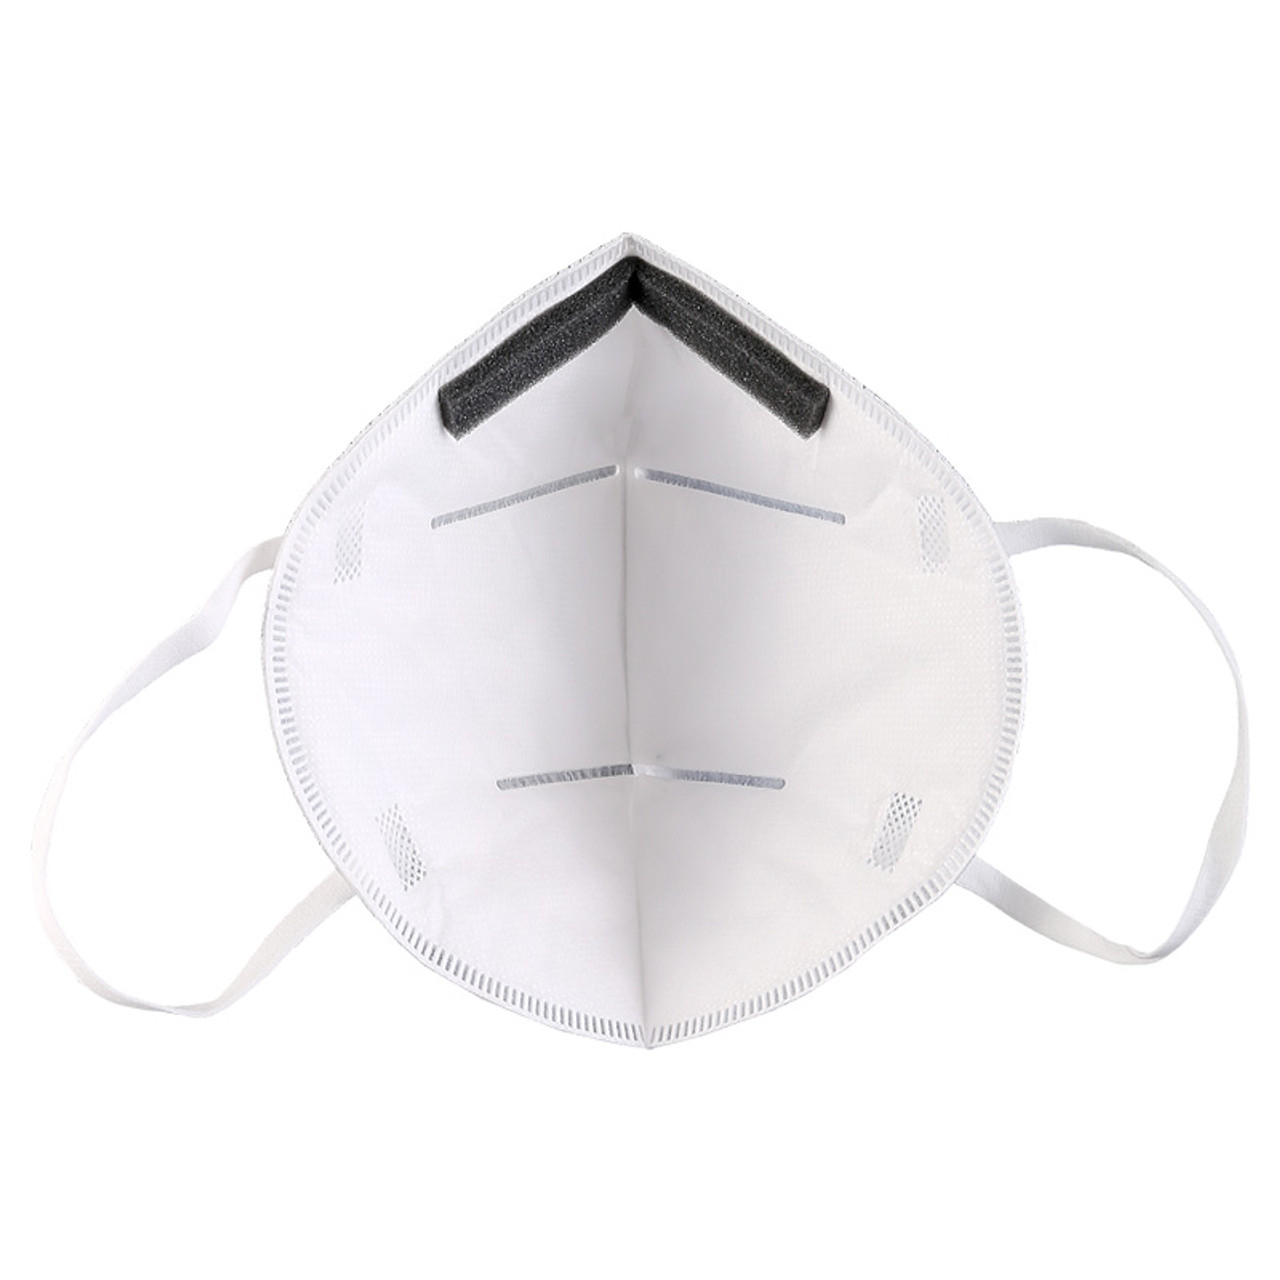 White Powecom® KN95 Respirator Face Mask - Ear Loop - 10 masks per pack -  Made to the NEW GB2626-2019 Standard with Better Breathability - Bona Fide